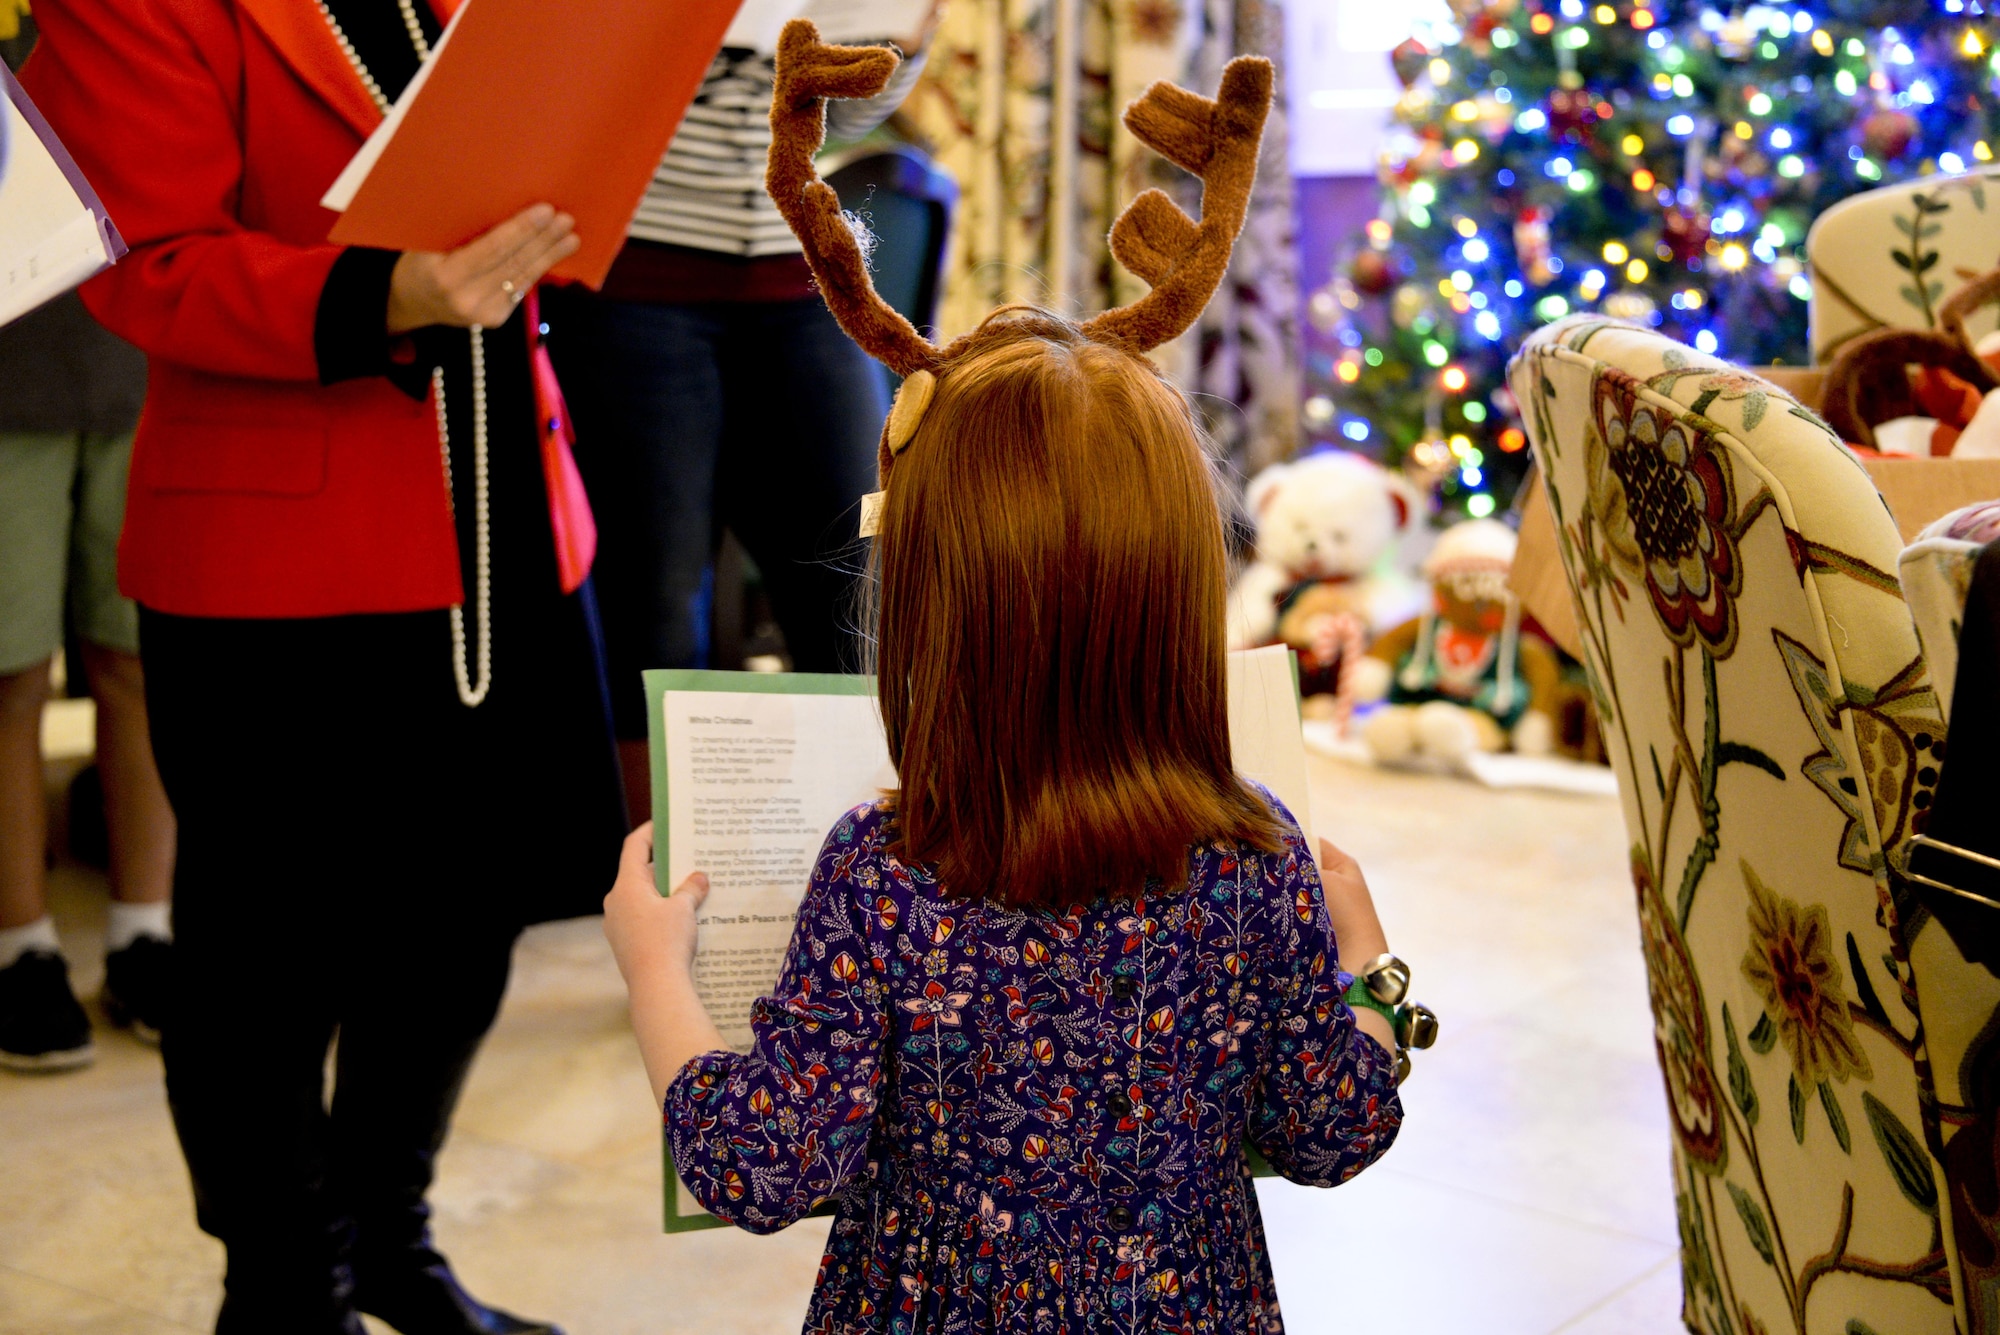 Children of families and employees at the Fisher House sing along as Delia Colvin, Army veteran and international bestselling author, and friend Steven Gary, guitarist and vocalist, perform Christmas carols Dec. 20, 2016 at the Fisher House, Travis Air Force Base, Calif. The Travis Fisher Houses are part of a collection of homes built on military bases to provide a place for families in need to stay without charge when a member is hospitalized. (U.S. Air Force photo/2nd Lt. Sarah Johnson)